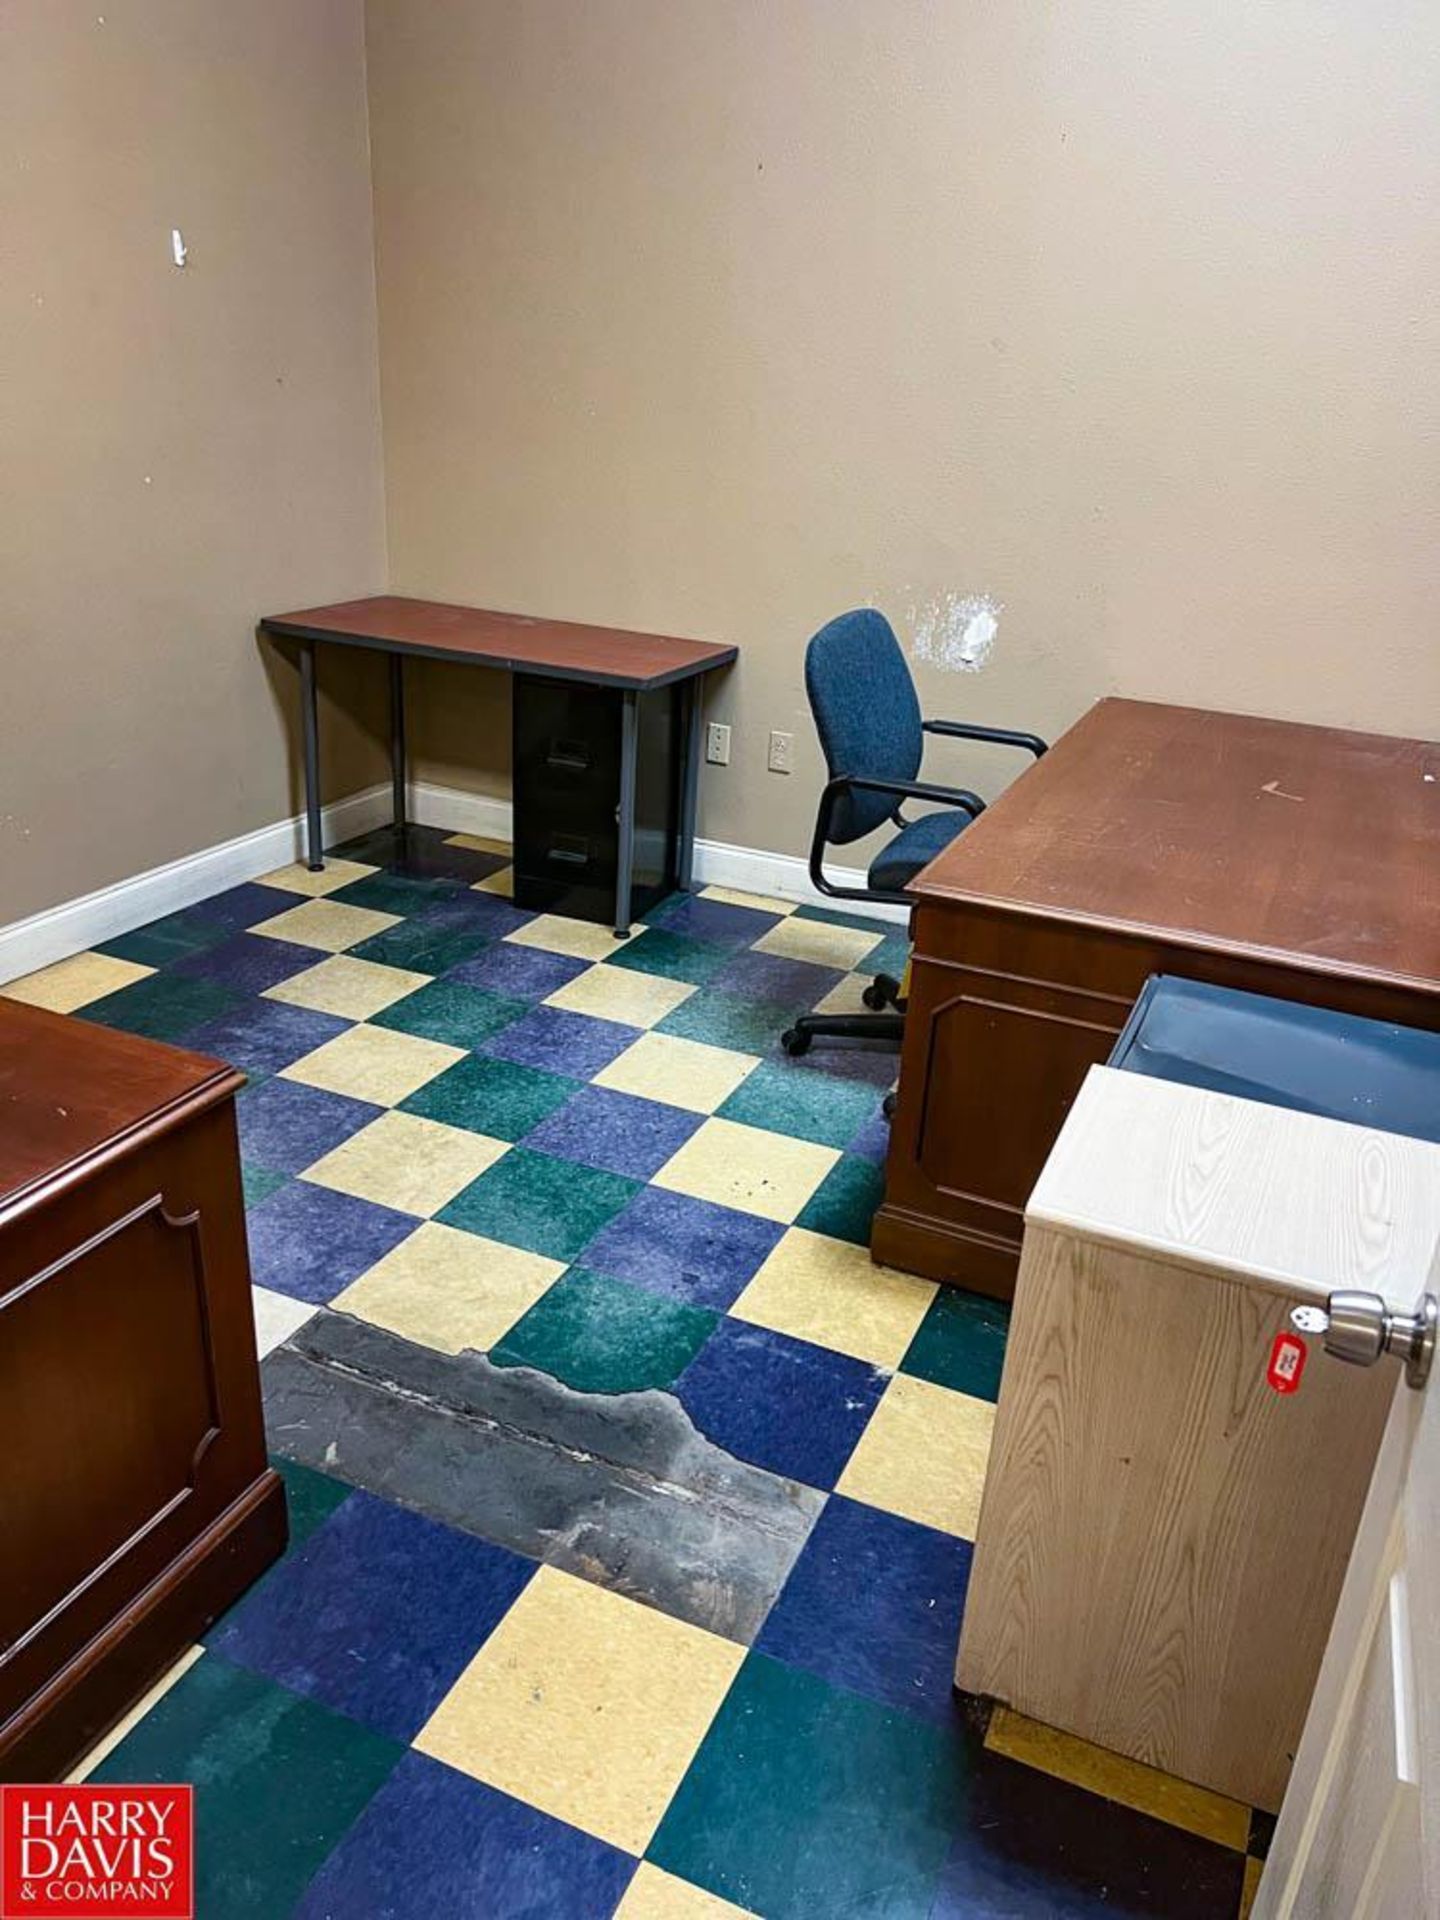 Assorted Desks with Filing Cabinets and Roller Chair - Rigging Fee: $400 - Image 2 of 2